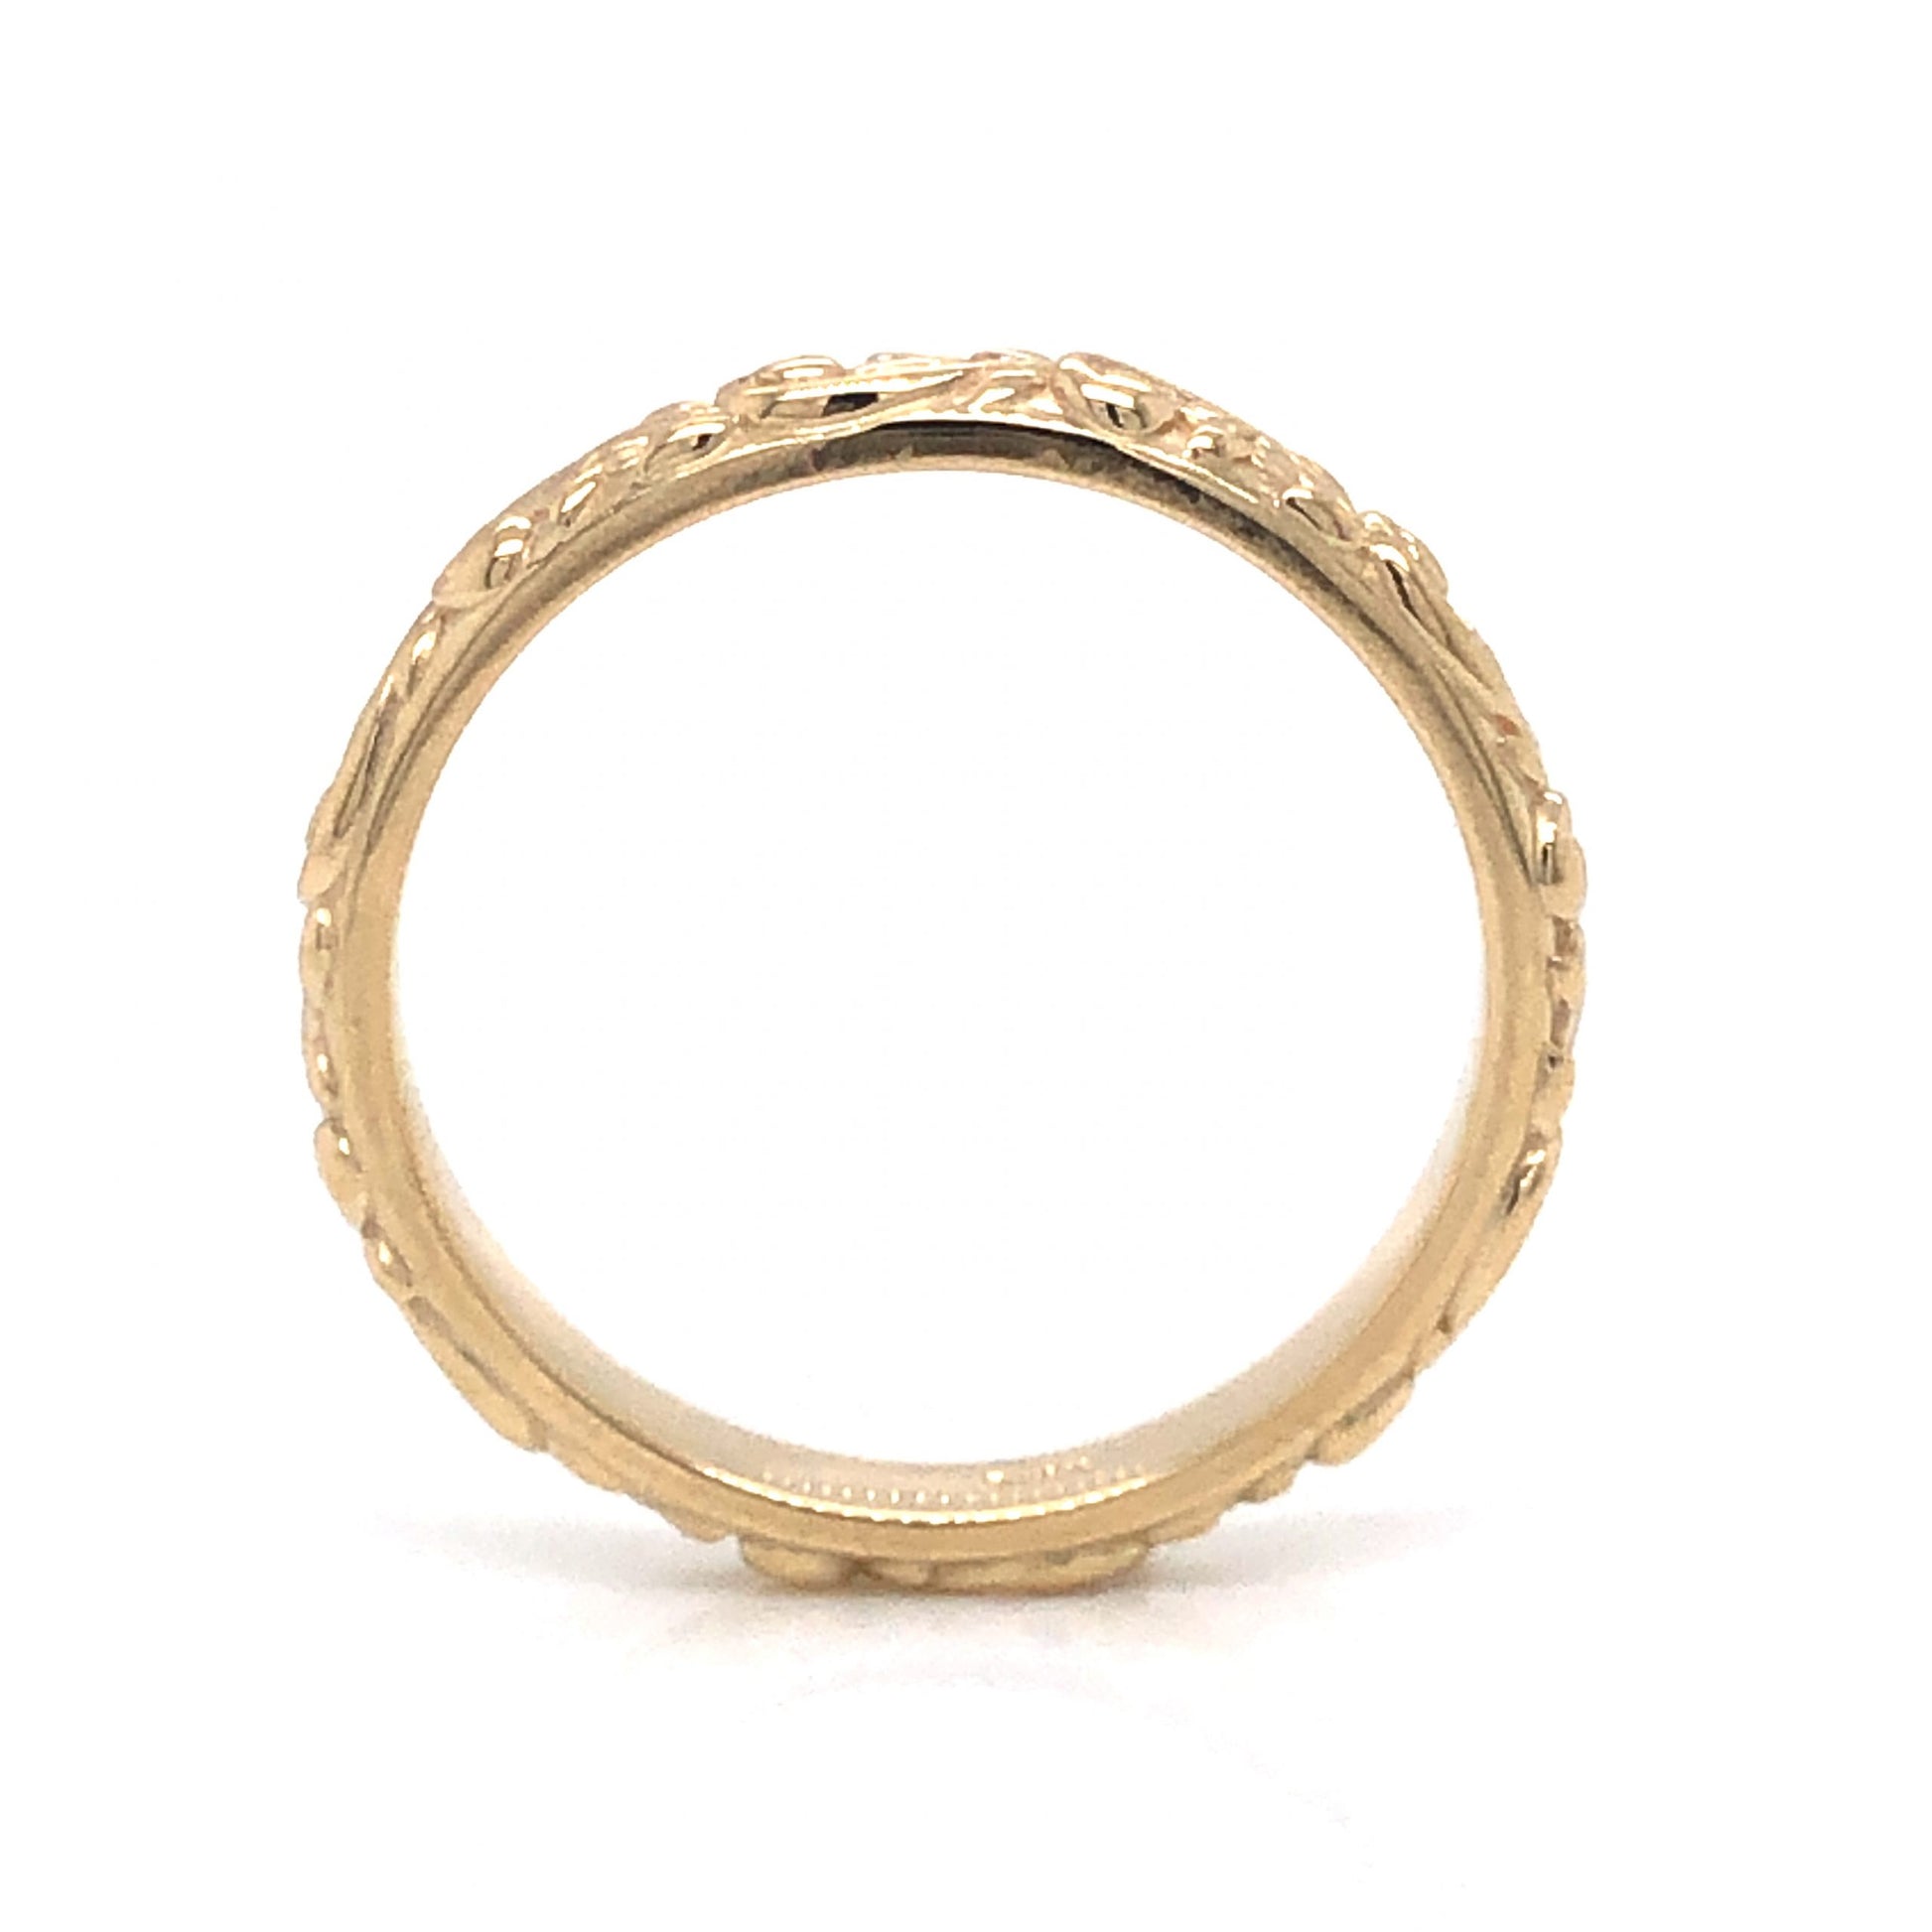 Vintage Inspired Filigree Wedding Band in 14k Yellow GoldComposition: 14 Karat Yellow Gold Ring Size: 7 Total Gram Weight: 2.9 g Inscription: 14k
      